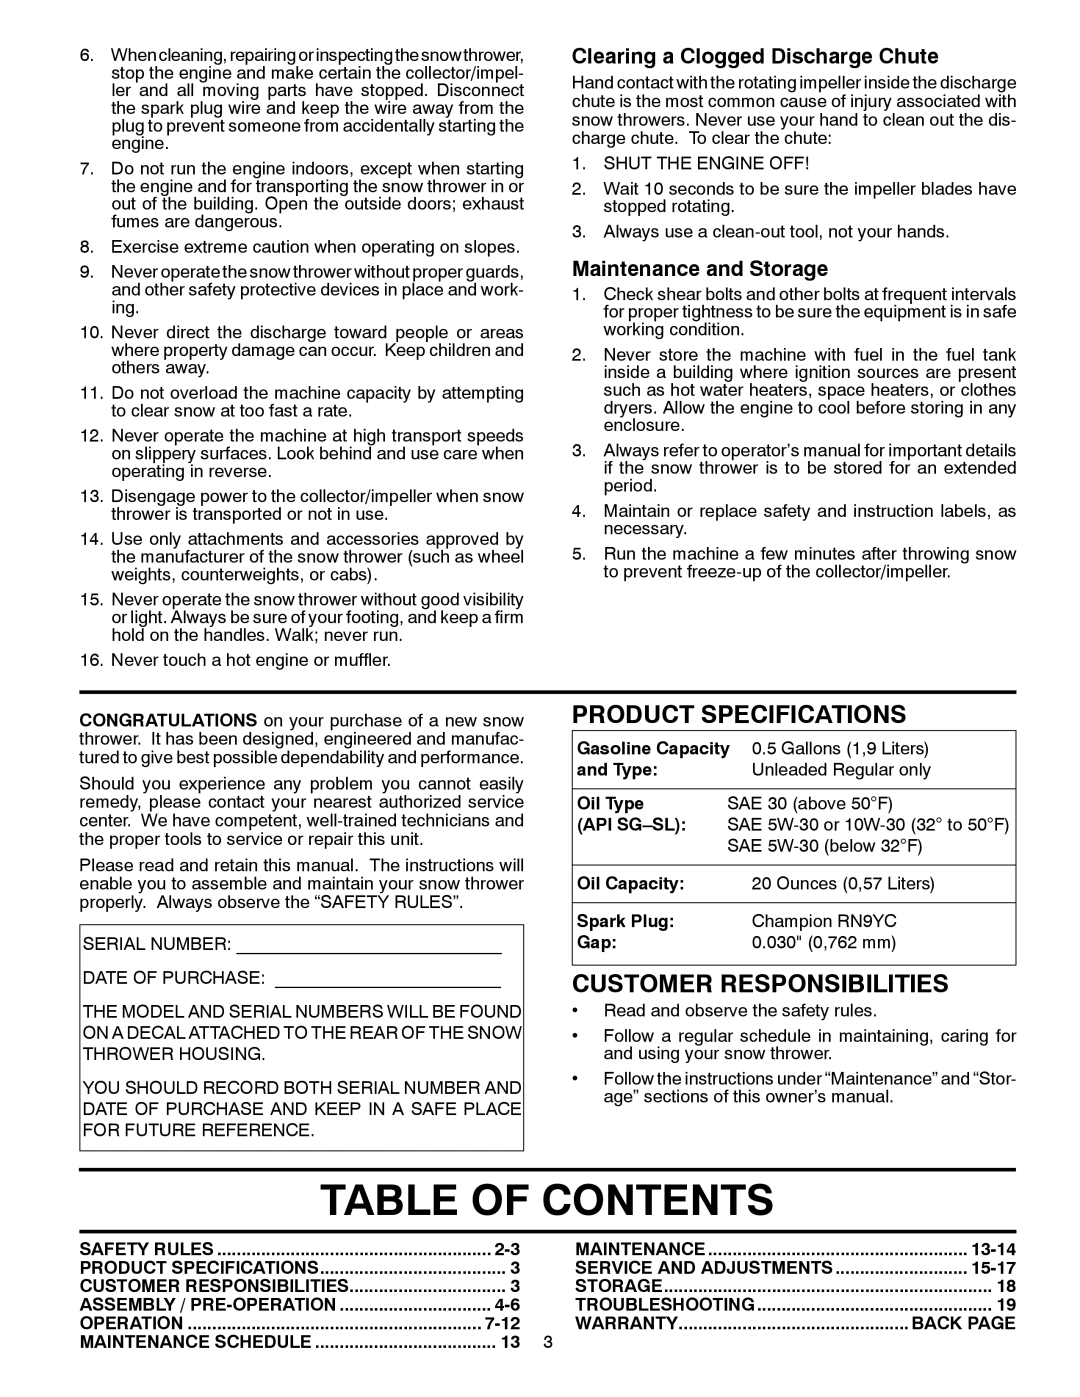 Husqvarna 96193004500 Table Of Contents, Clearing a Clogged Discharge Chute, Maintenance and Storage, Oil Type, Api Sg-Sl 